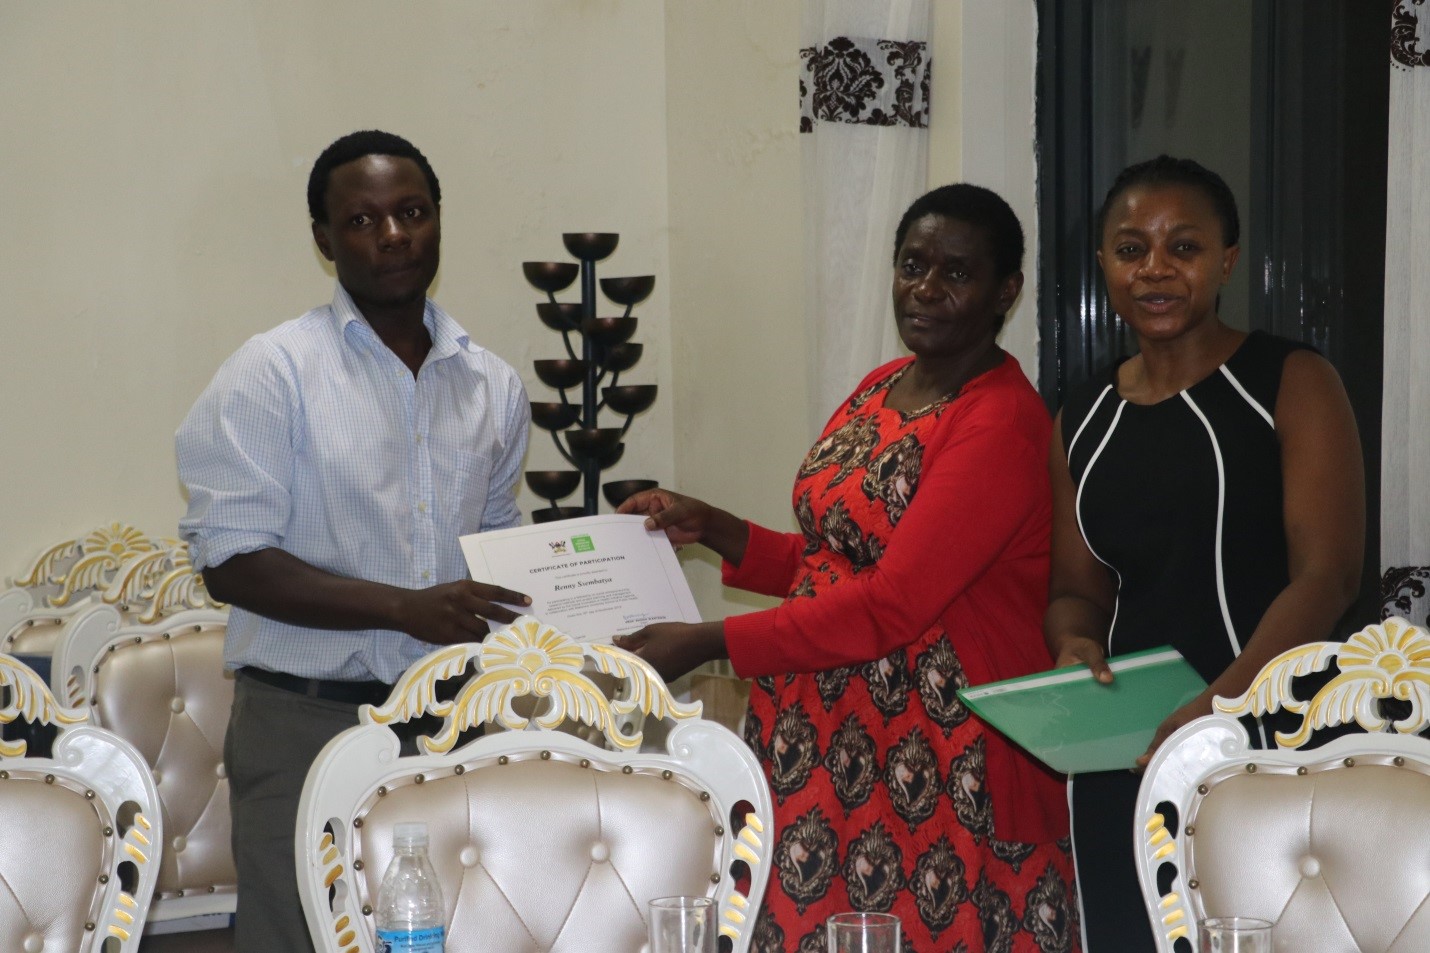 One of the participants receives a certificate from the Guest of Honour, Ms. Jennifer Muwuliza, the Asst. Commissioner in the Ministry of Science, Technology and Innovations.